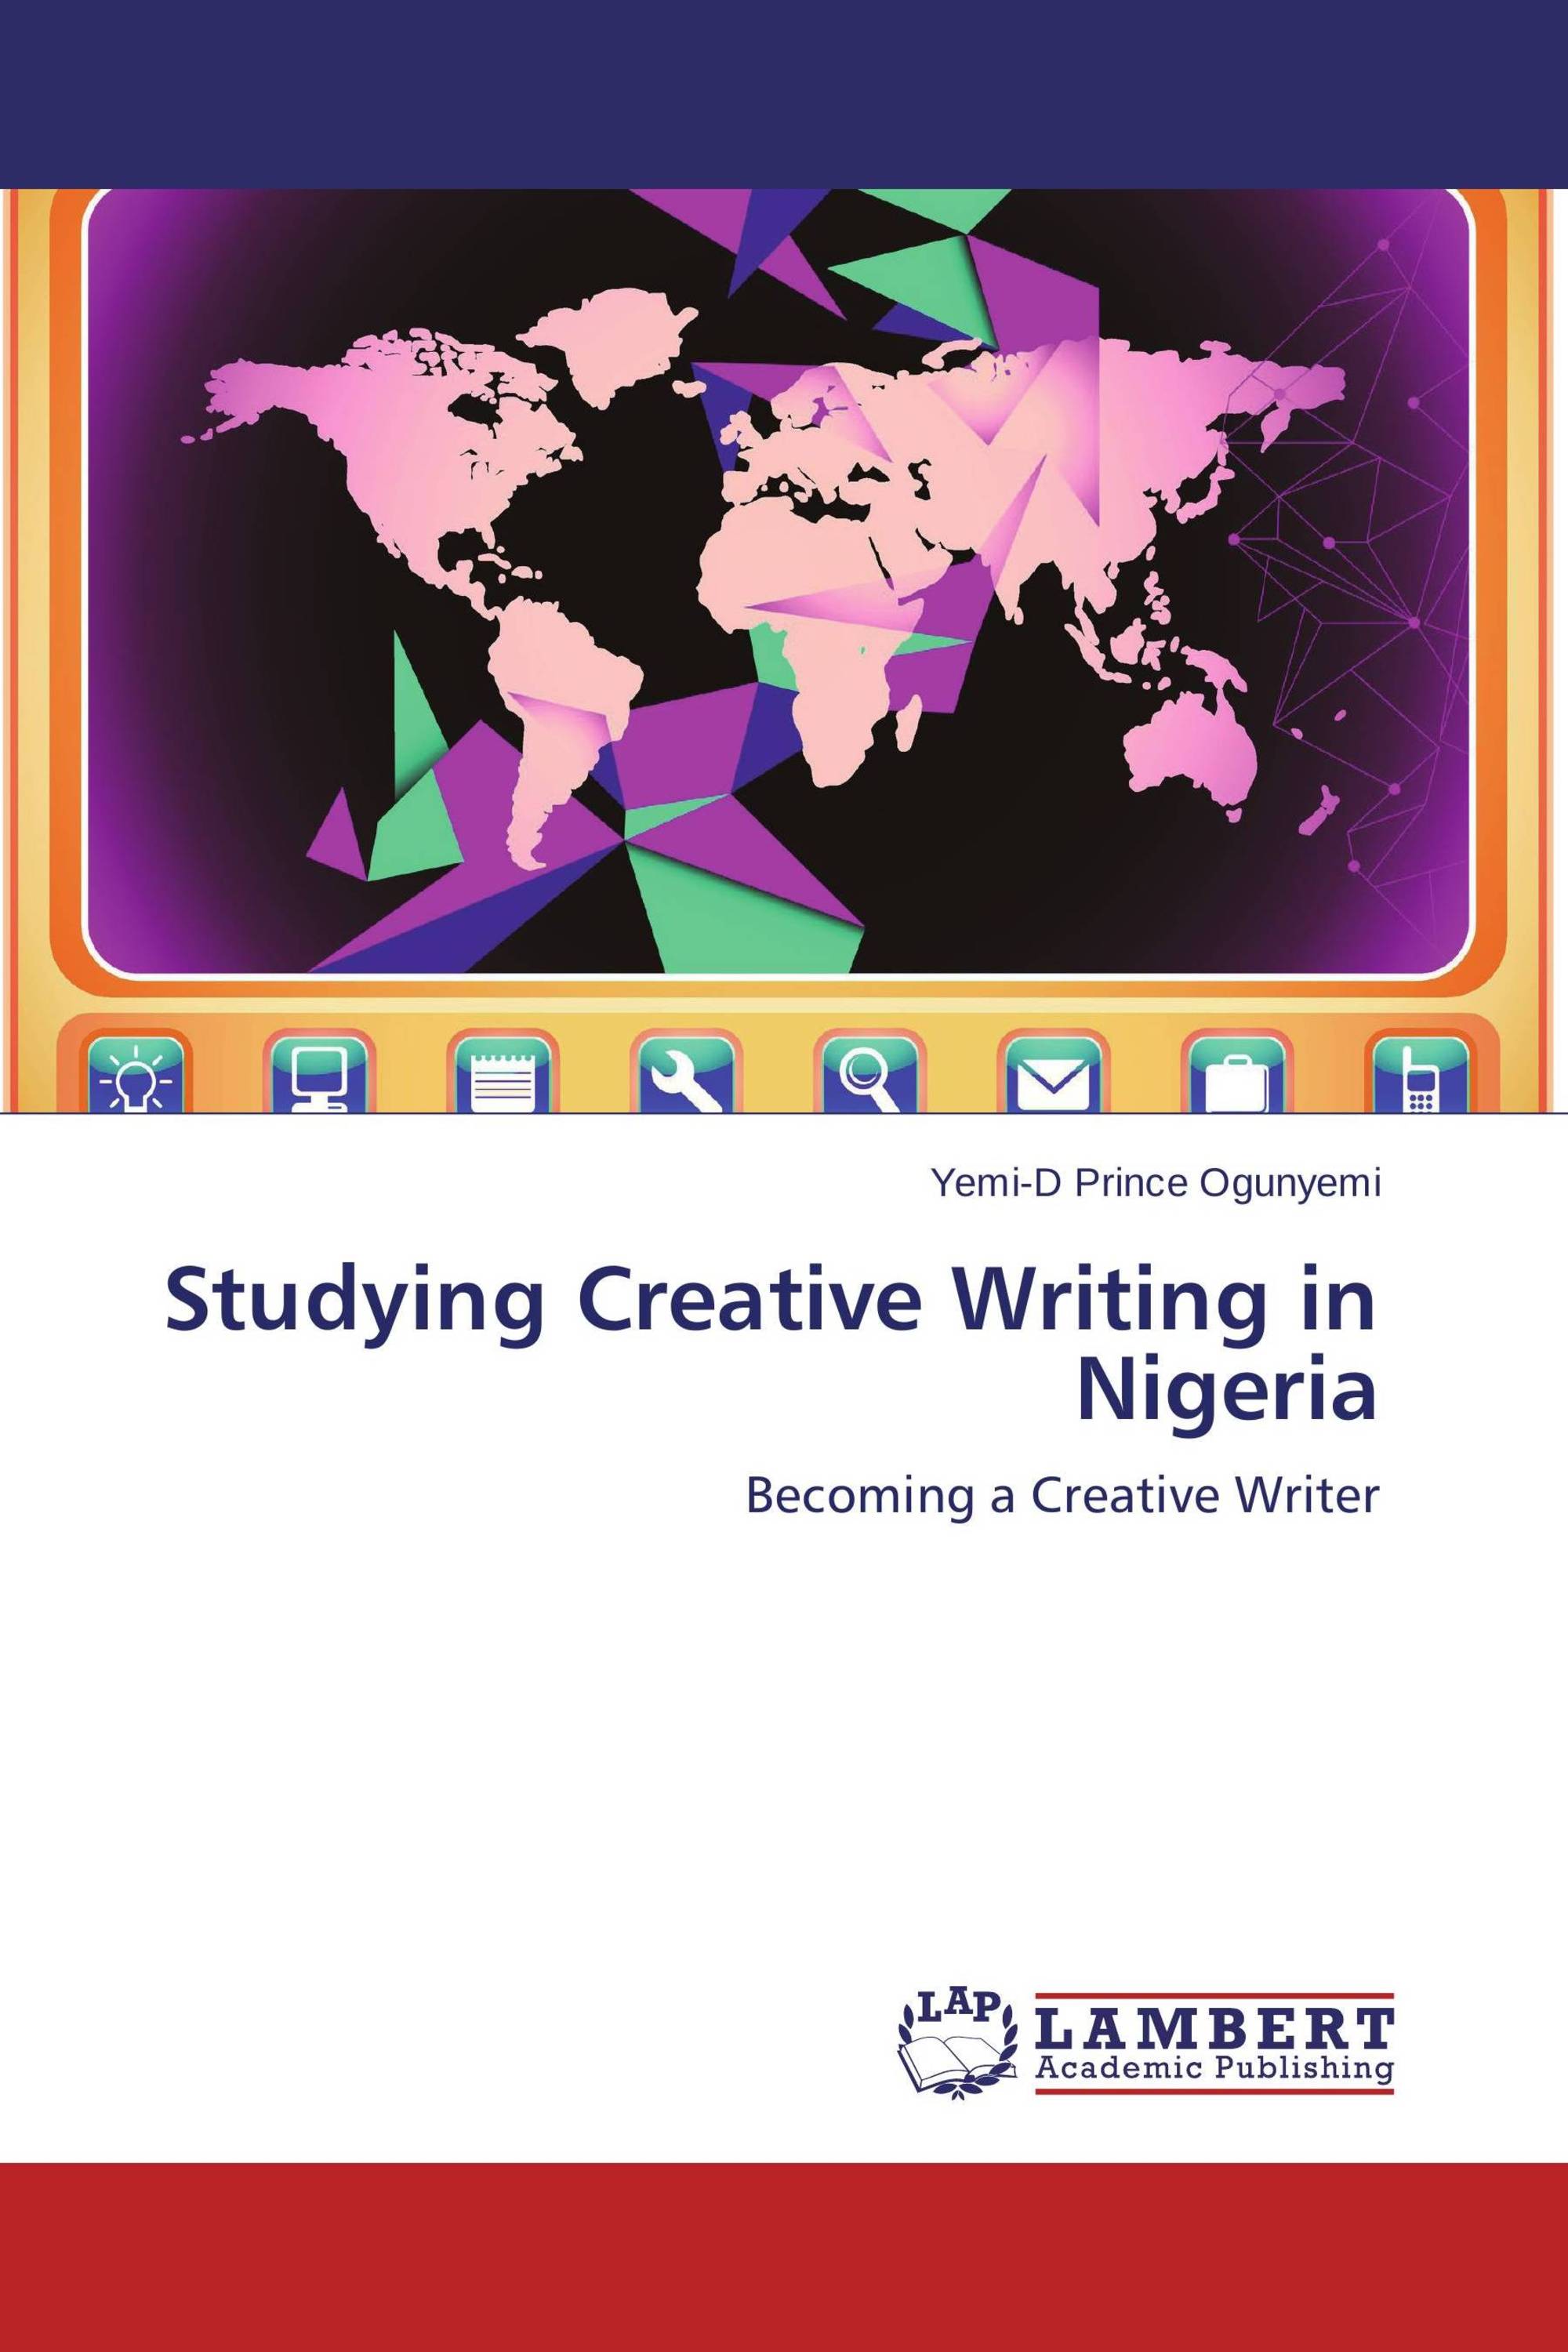 universities that offer creative writing in nigeria